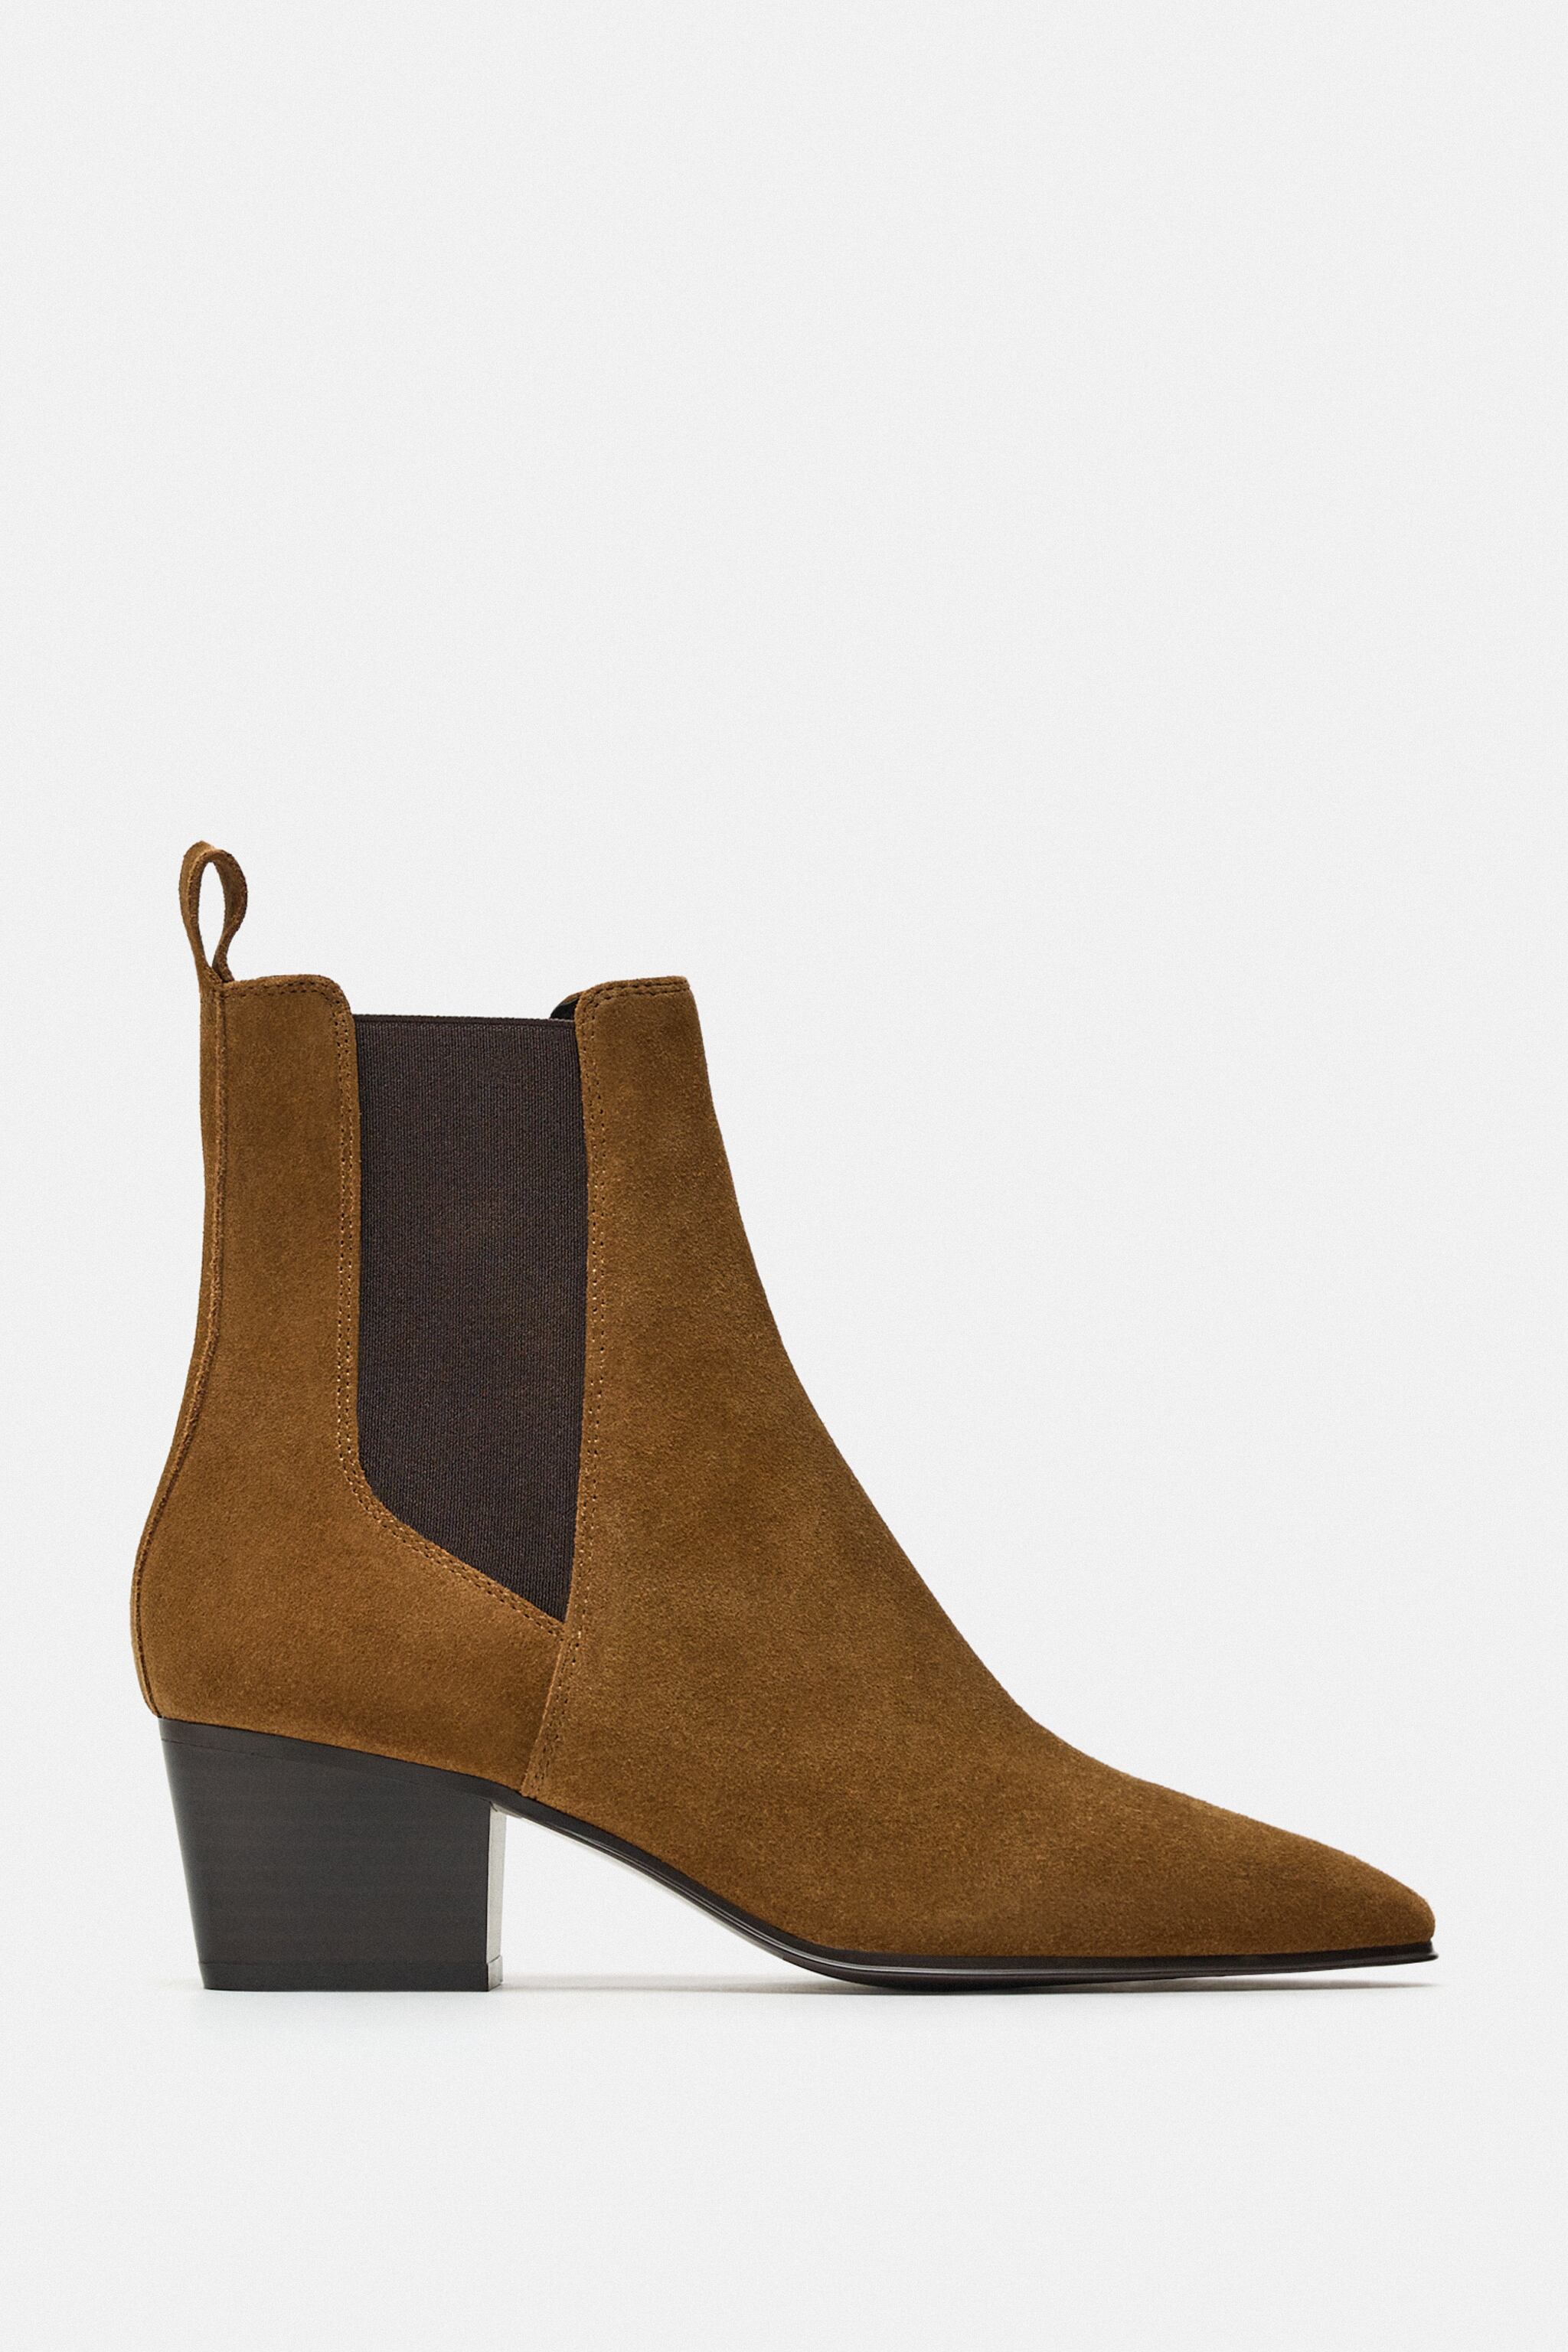 SPLIT LEATHER ANKLE BOOTS